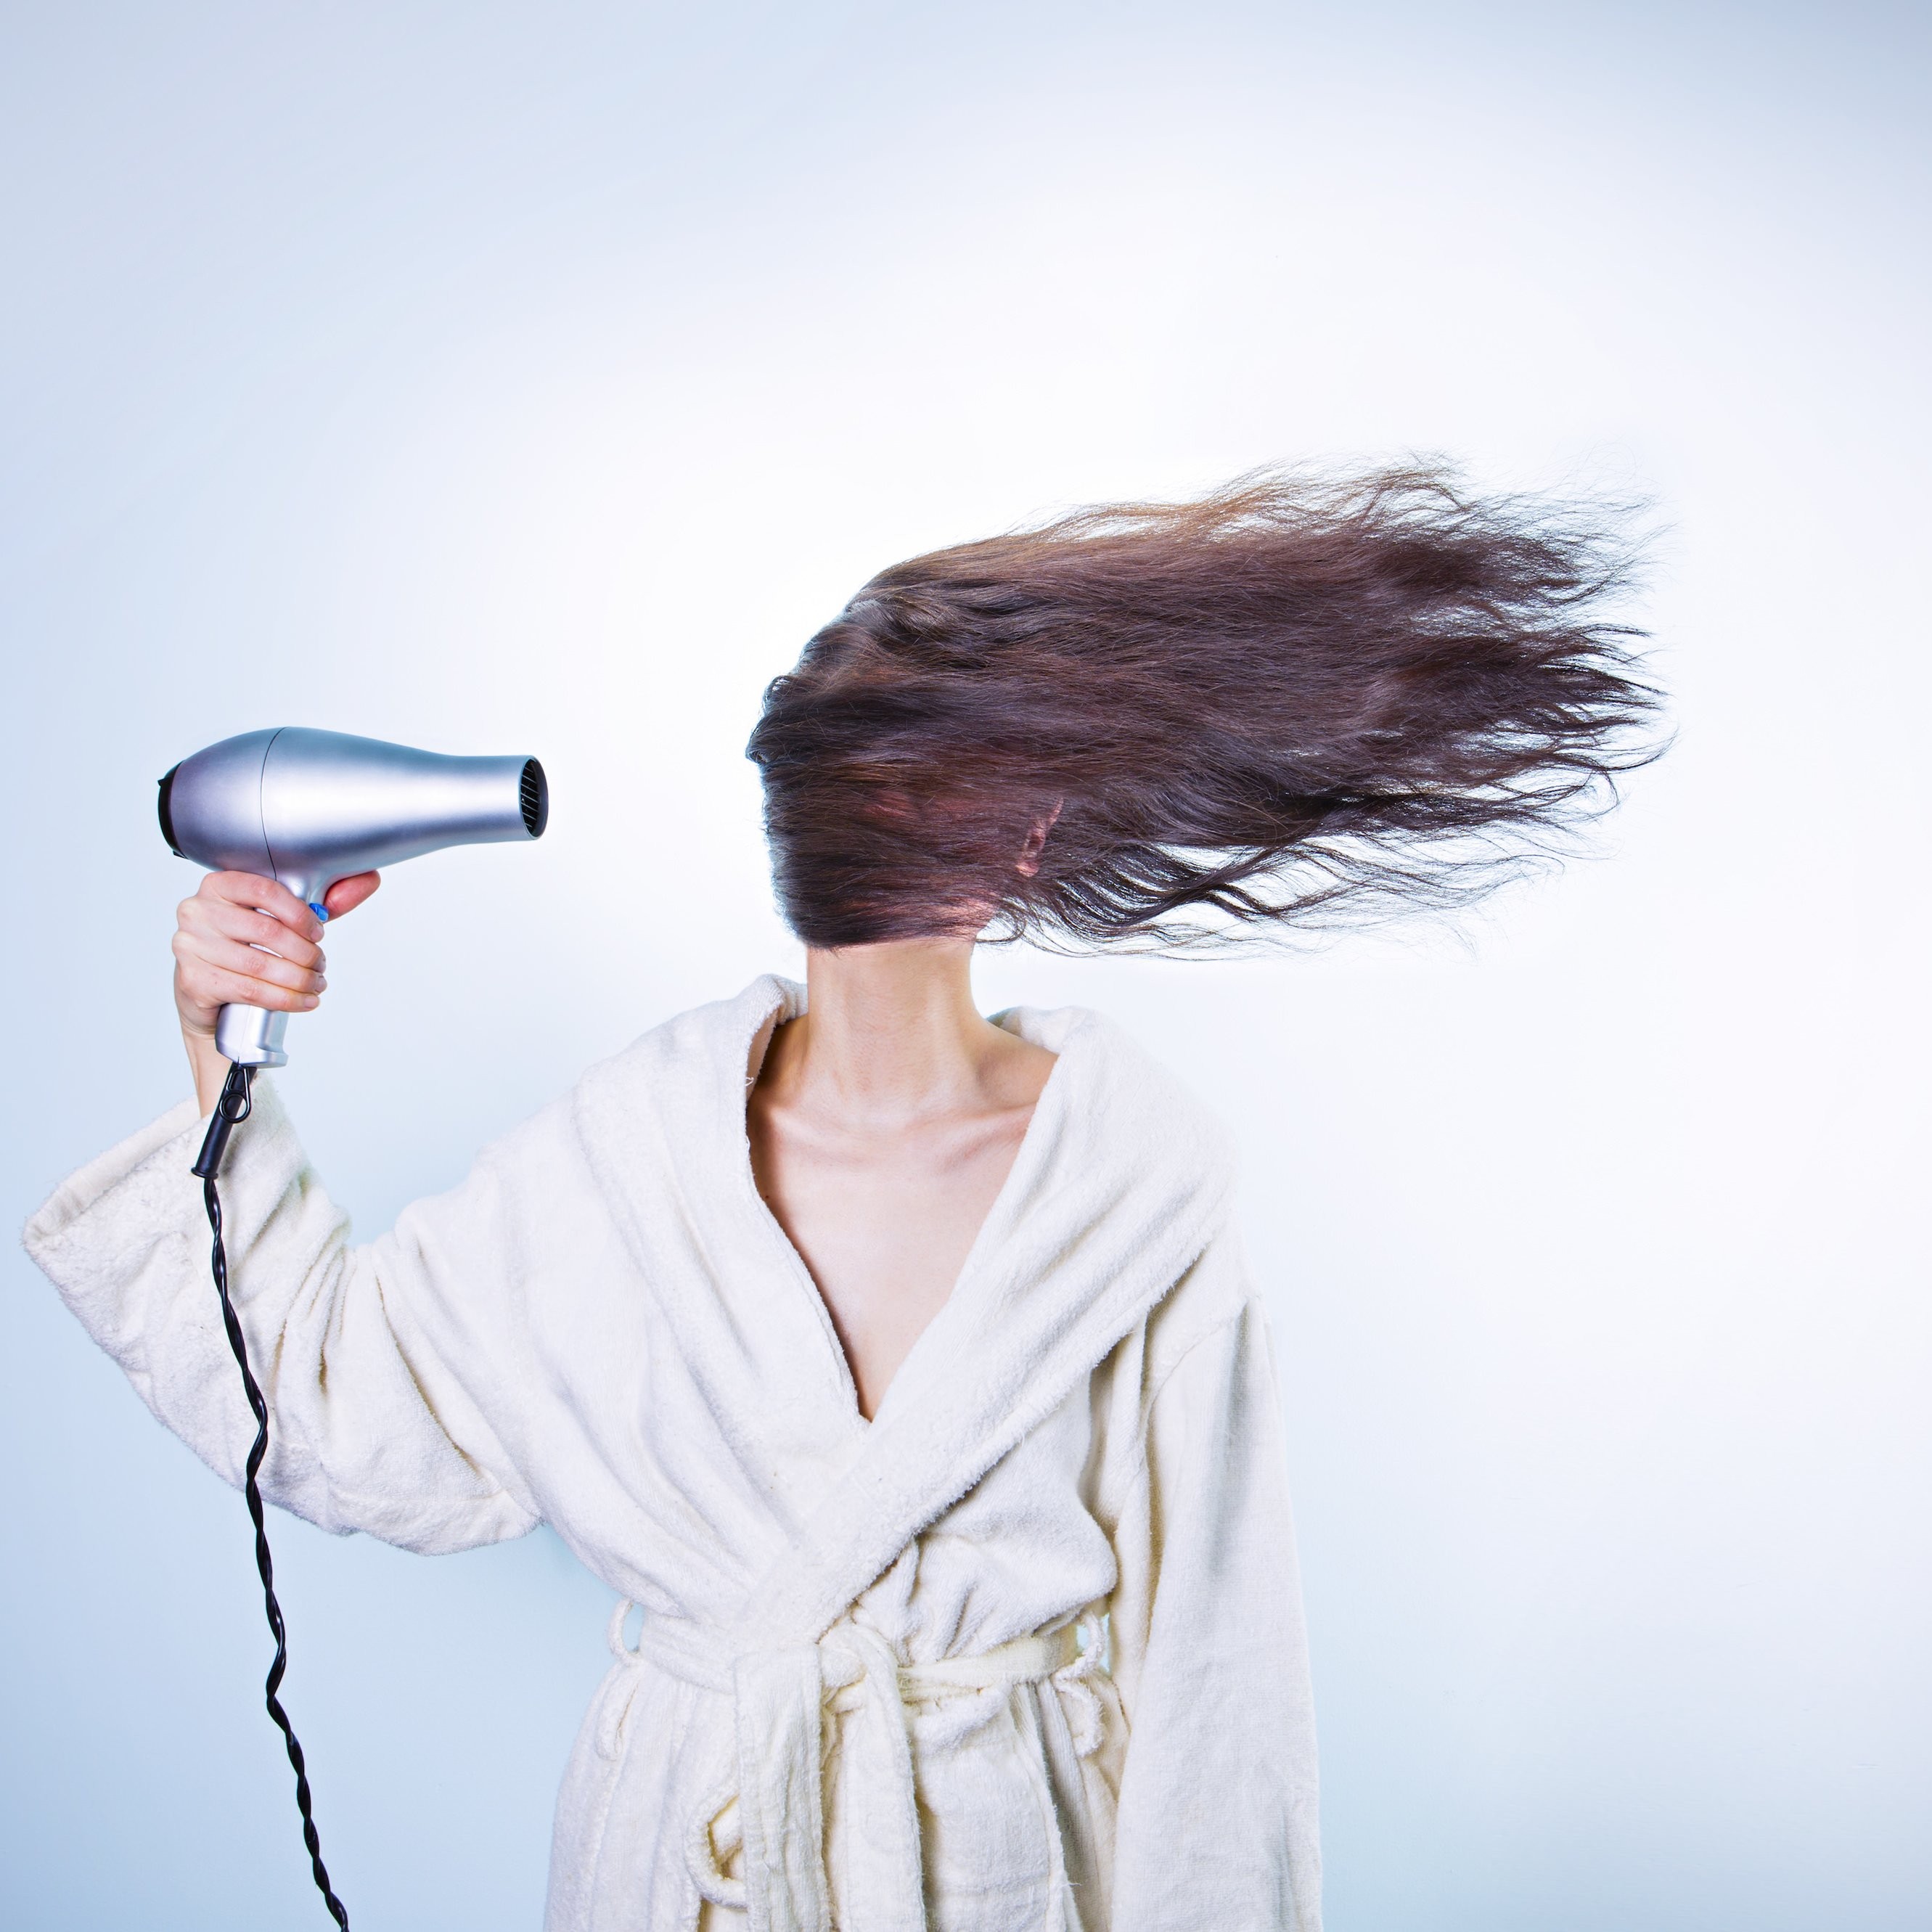 Powerful Hair Dryer Wallpaper for Apple iPhone 6 Plus